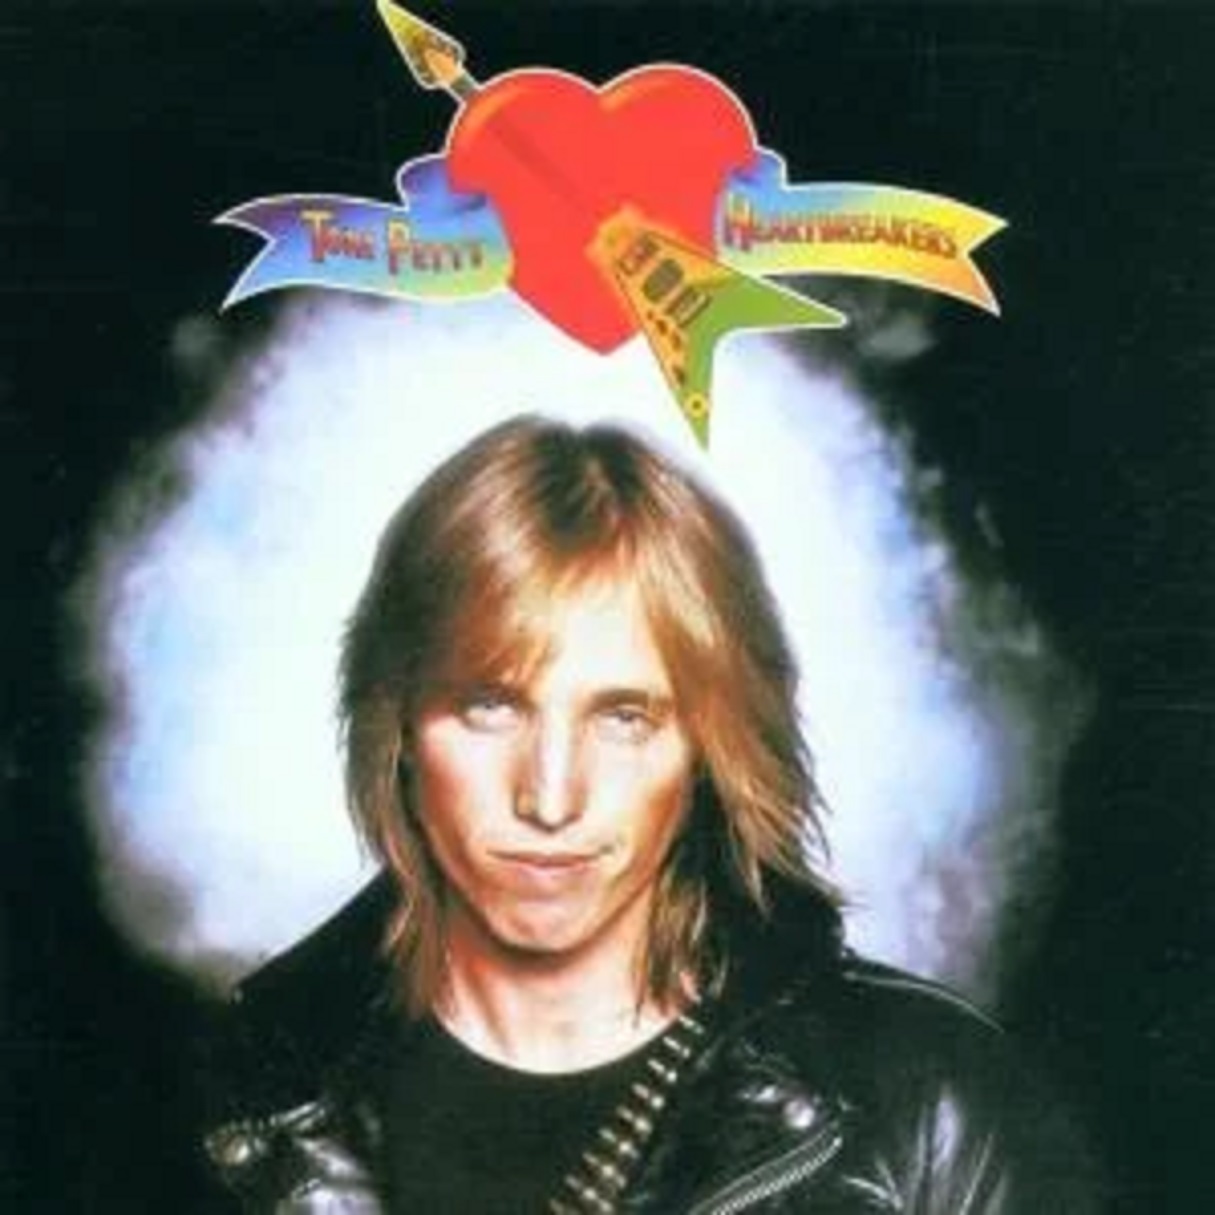 Tom Petty And The Heartbreakers | Tom Petty And The Heartbreakers